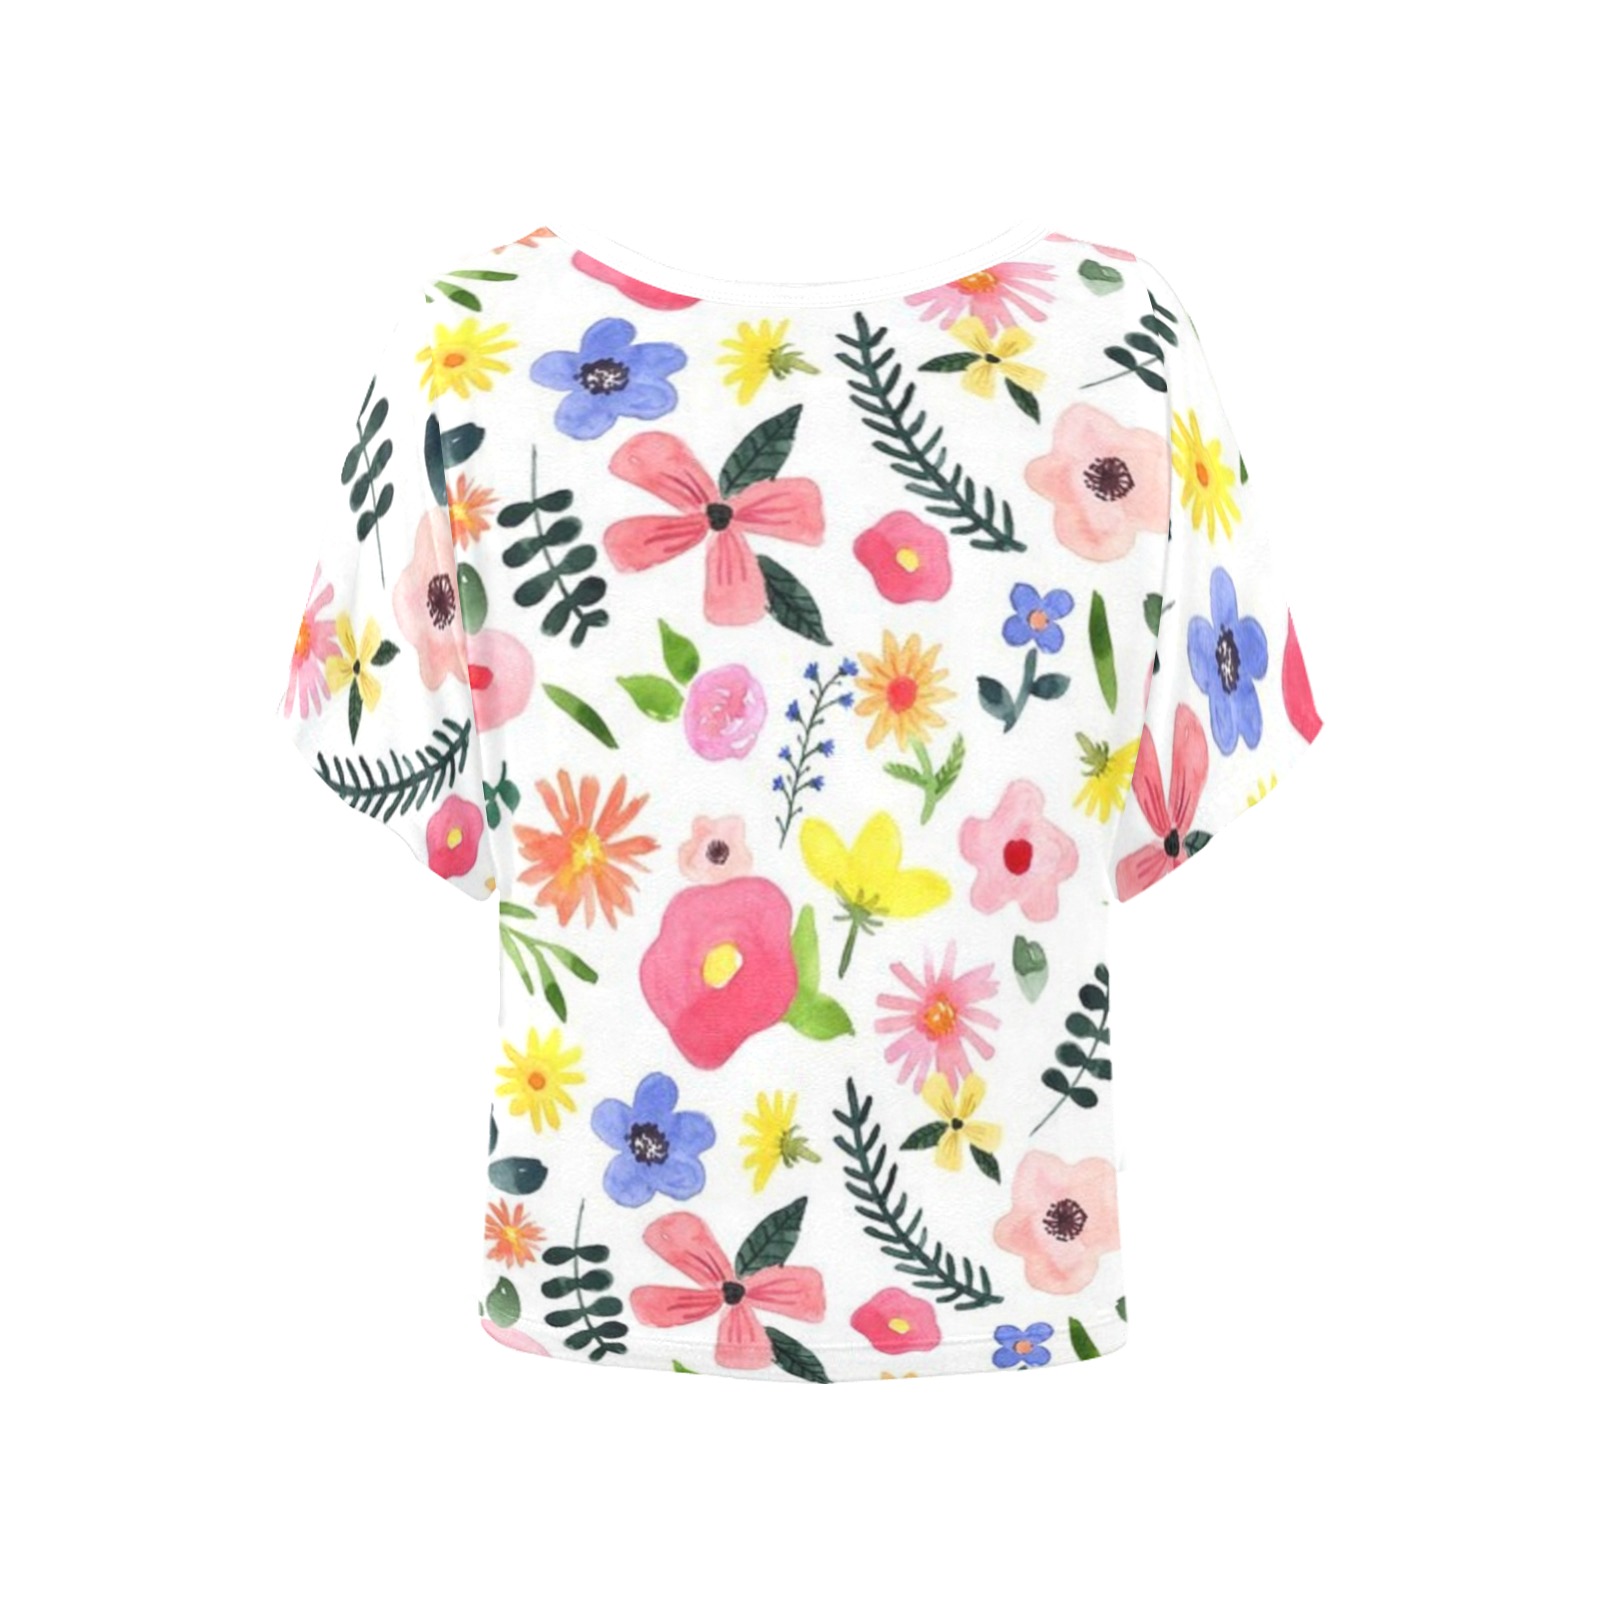 flower pattern of daisies Women's Batwing-Sleeved Blouse T shirt (Model T44)